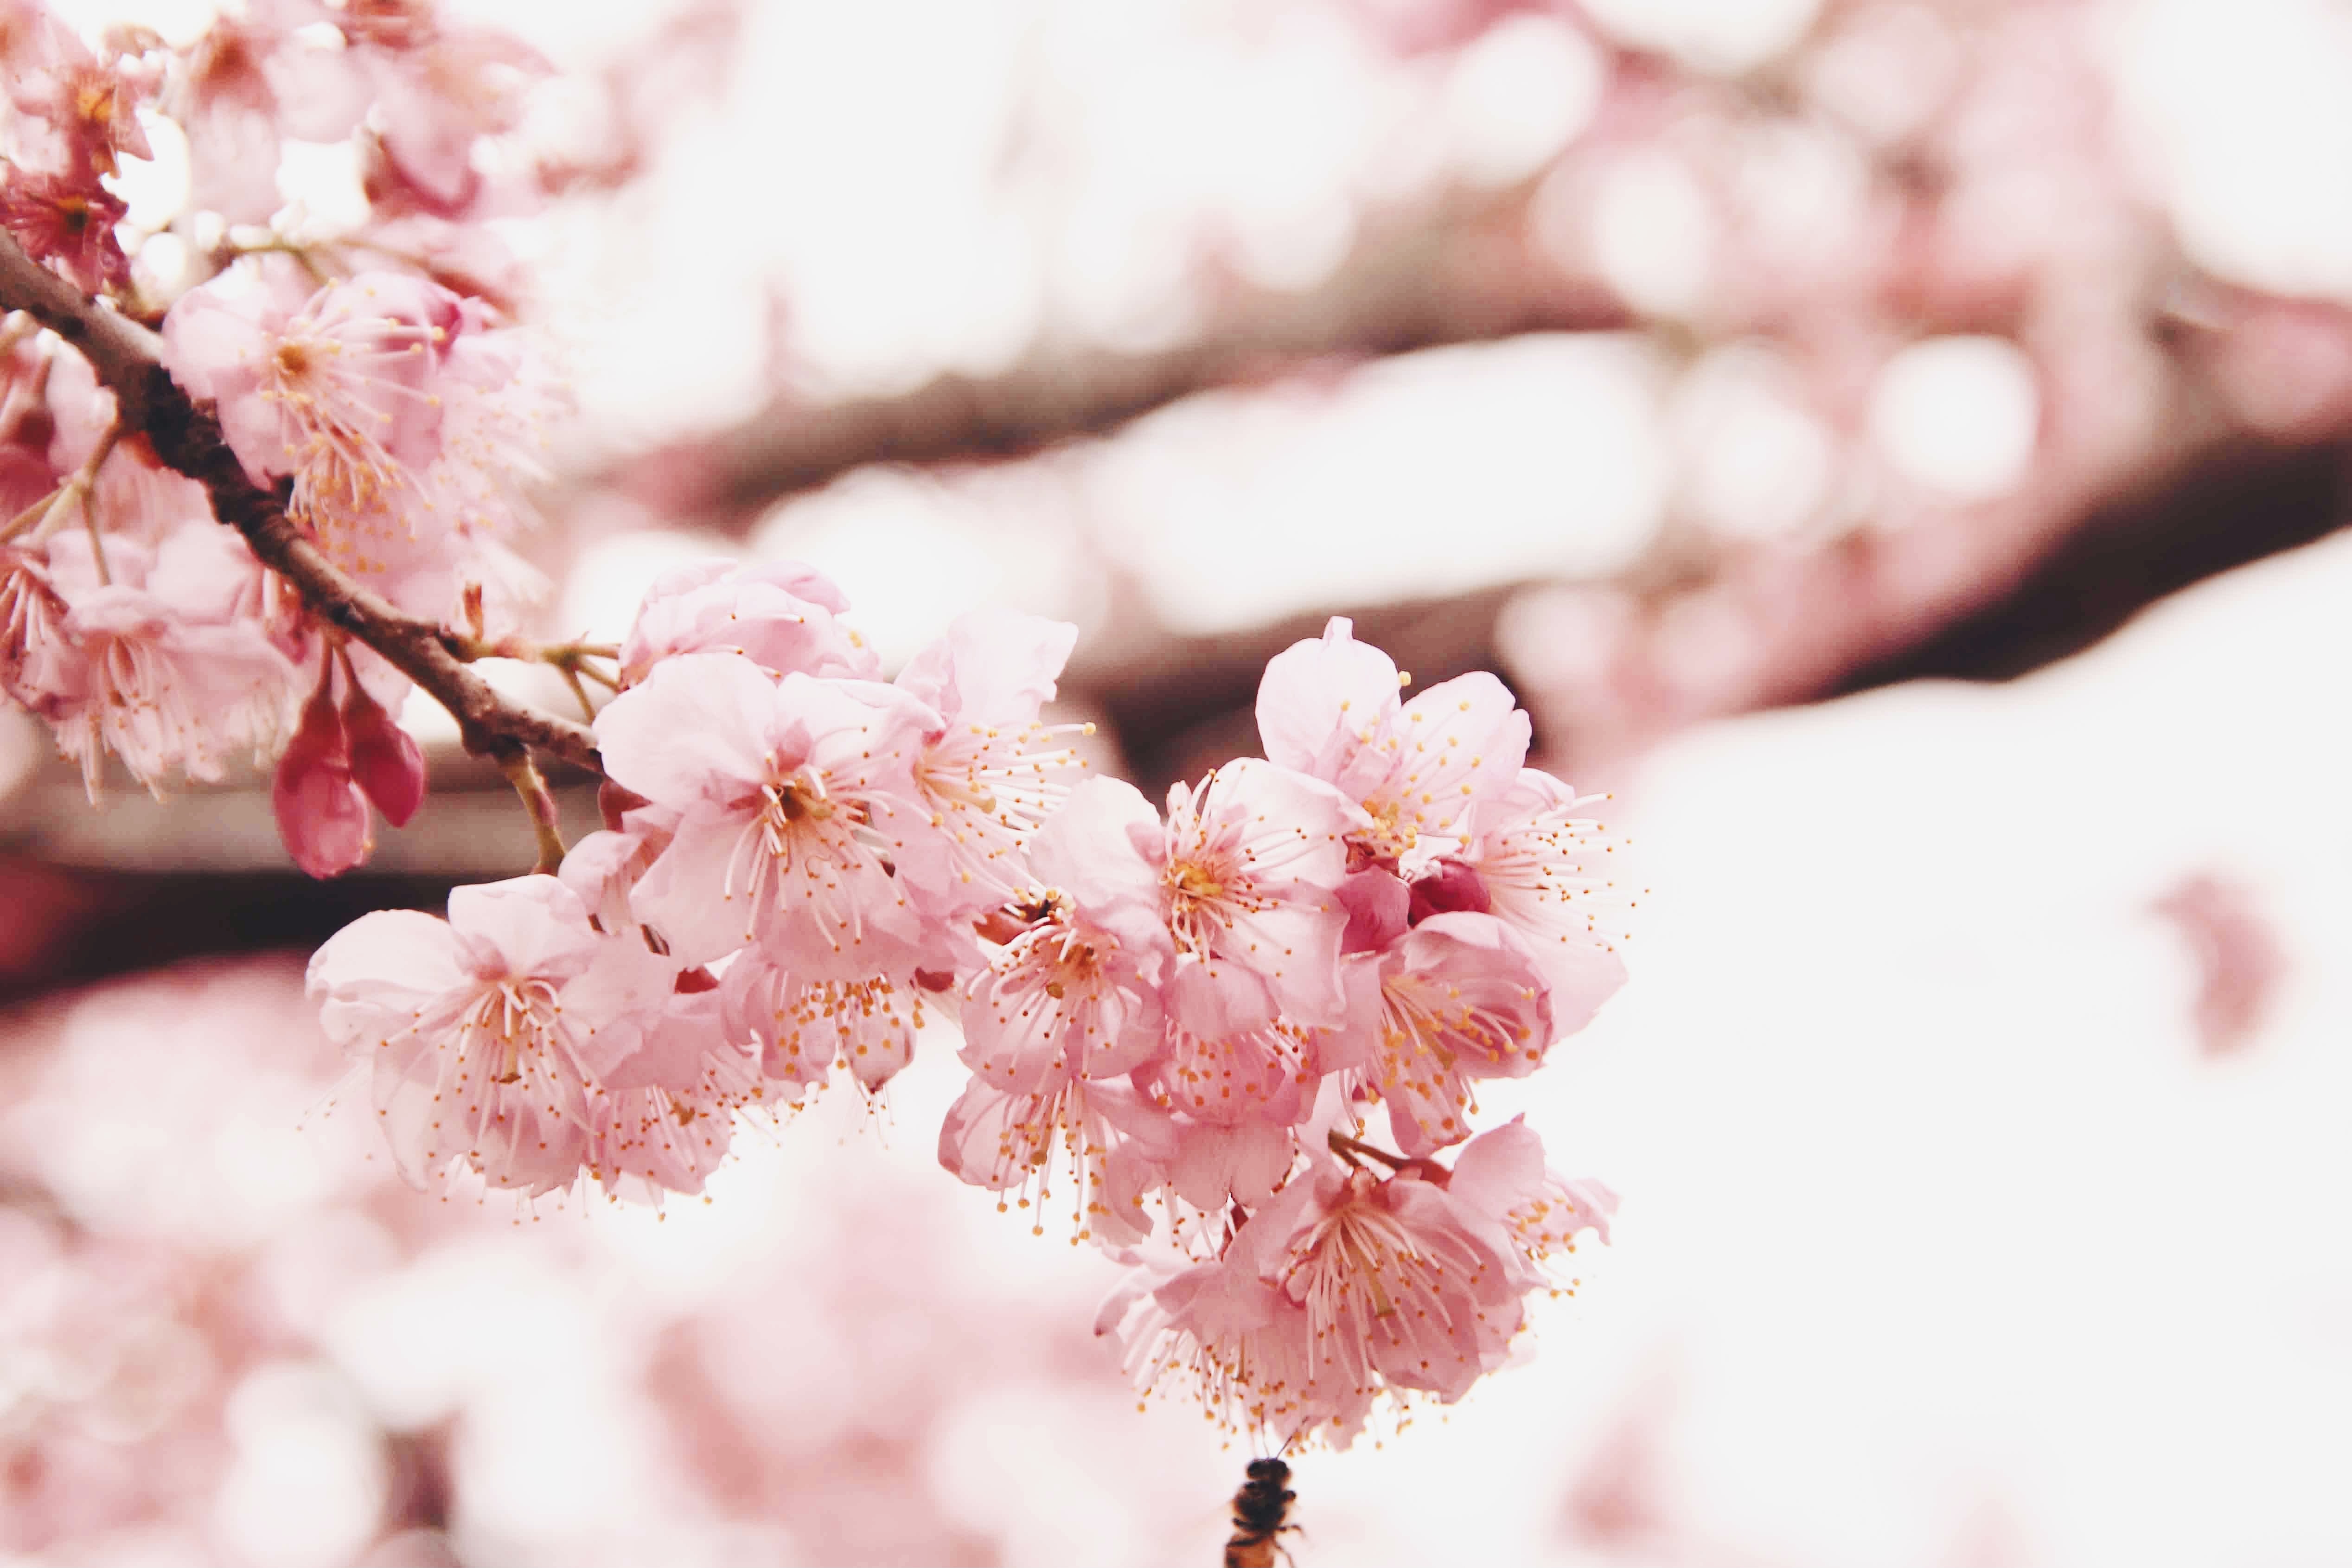 cheah ck recommends Ms Cherry Blossoms Pictures